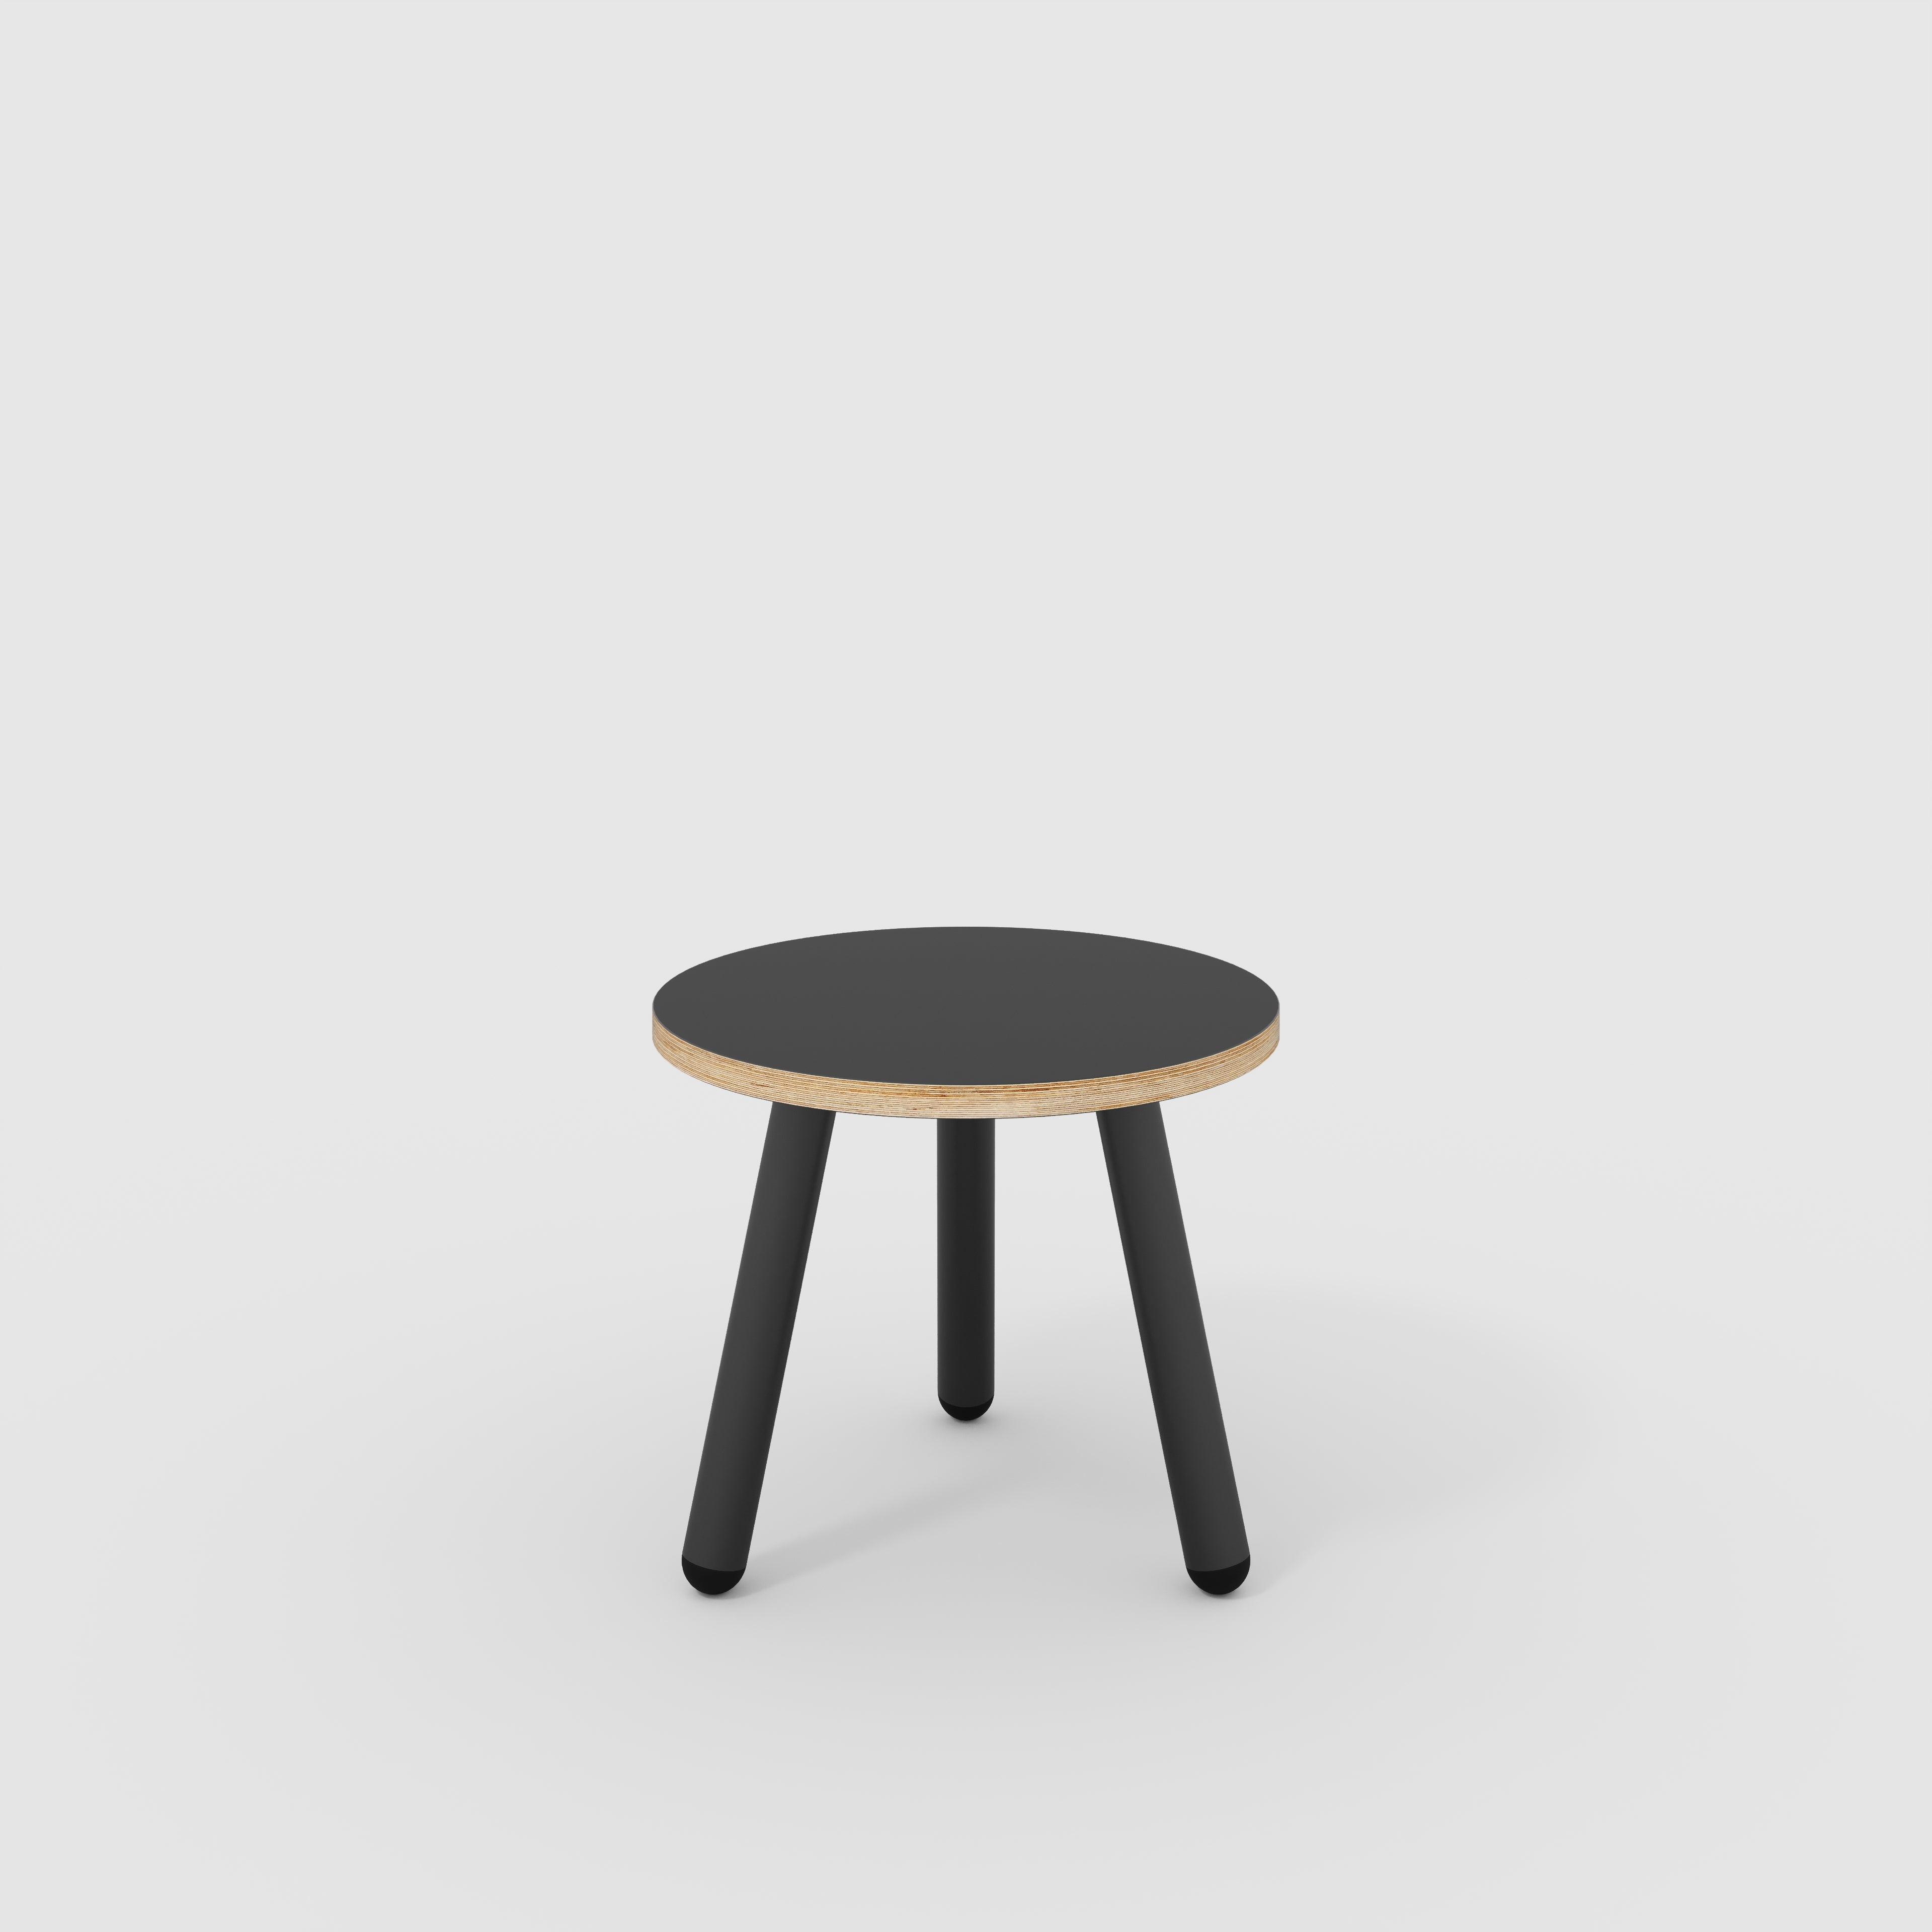 Round Side Table with Black Round Single Pin Legs - Formica Diamond Black - 500(w) x 500(d) x 425(h)